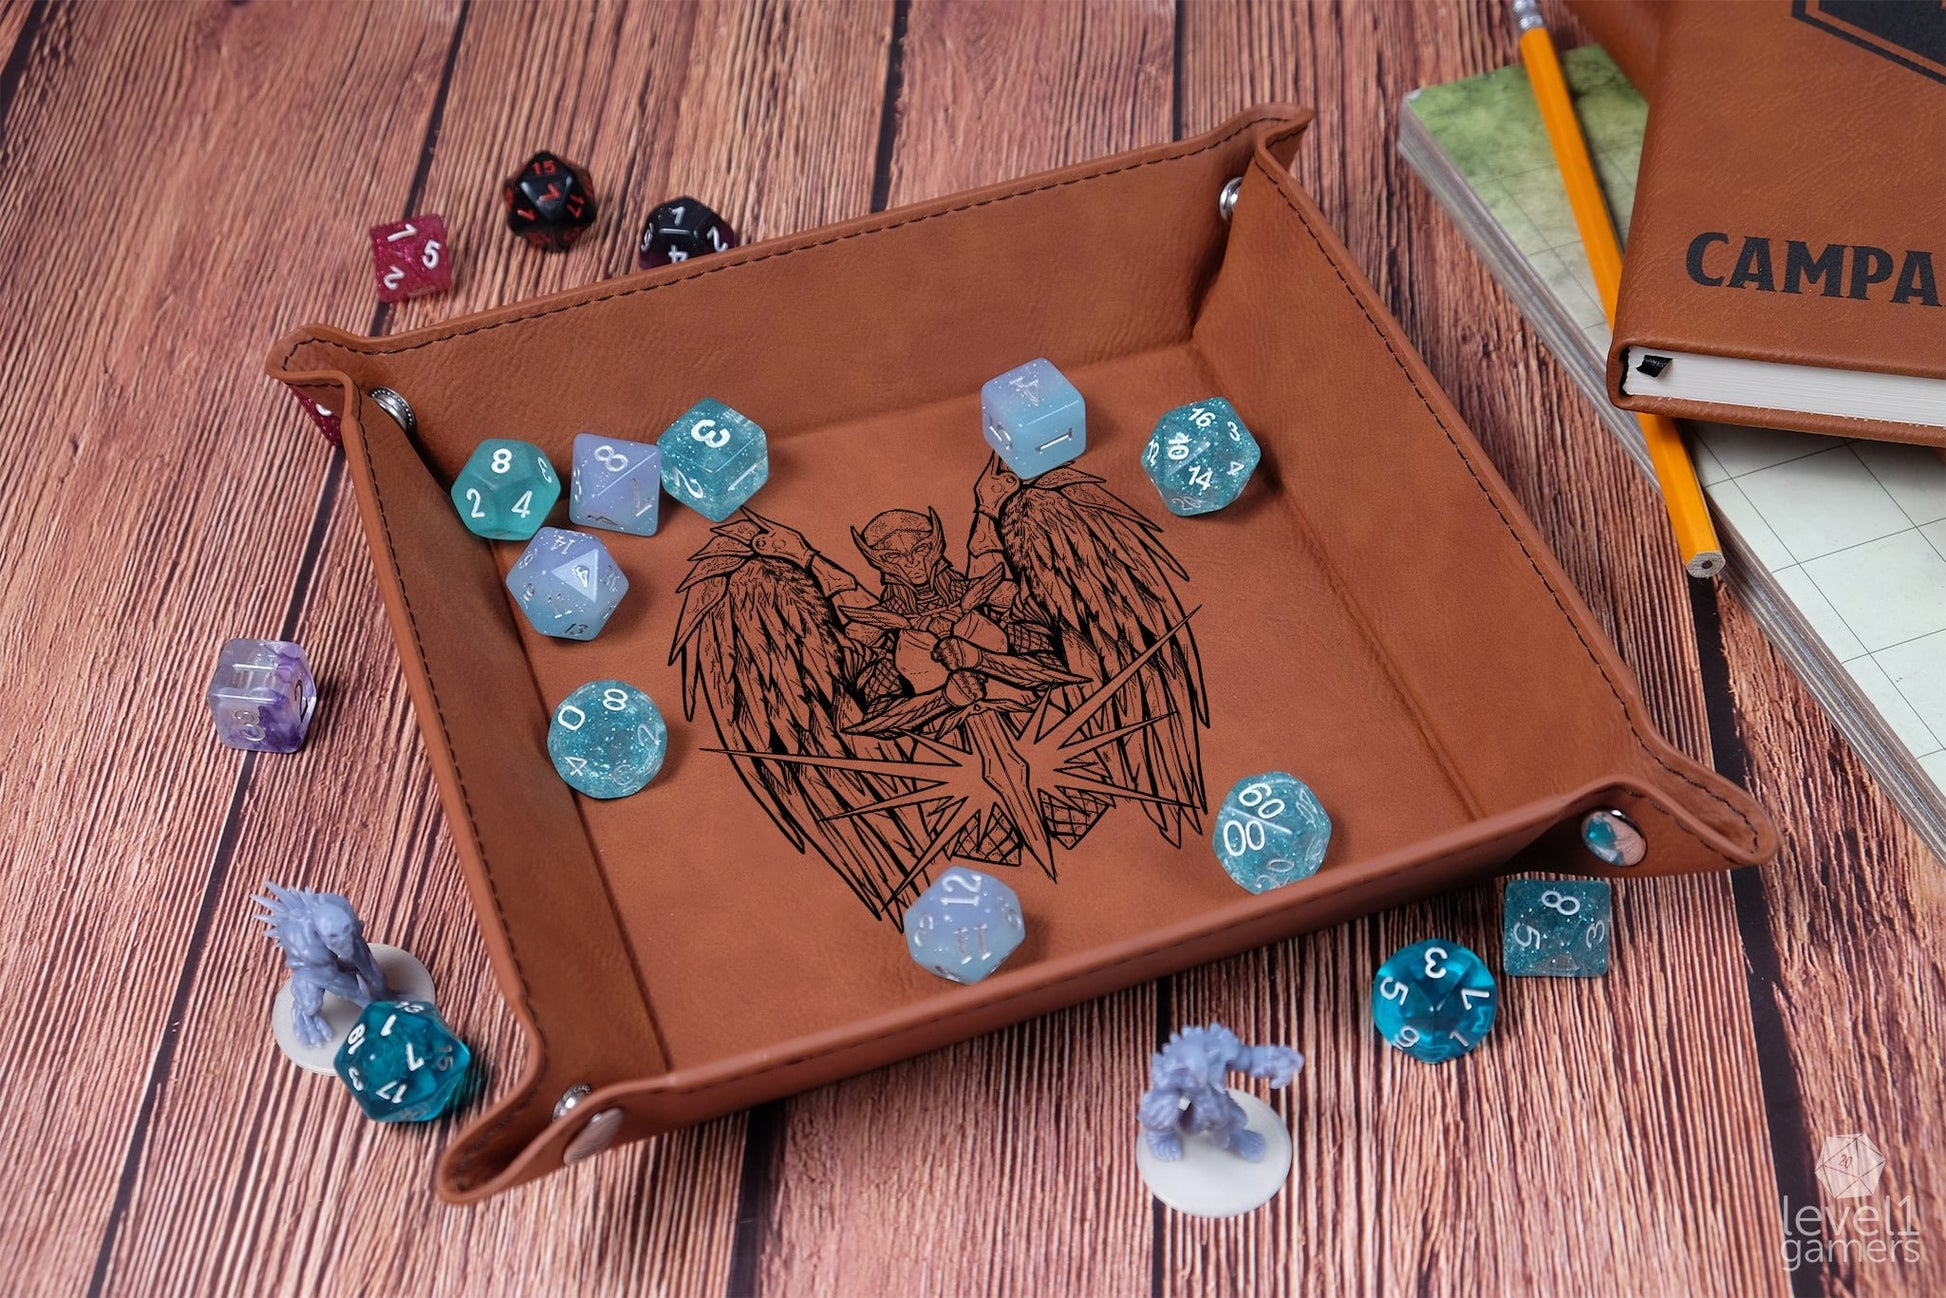 Angel Of Justice Dice Tray Dice Trays Level 1 Gamers   